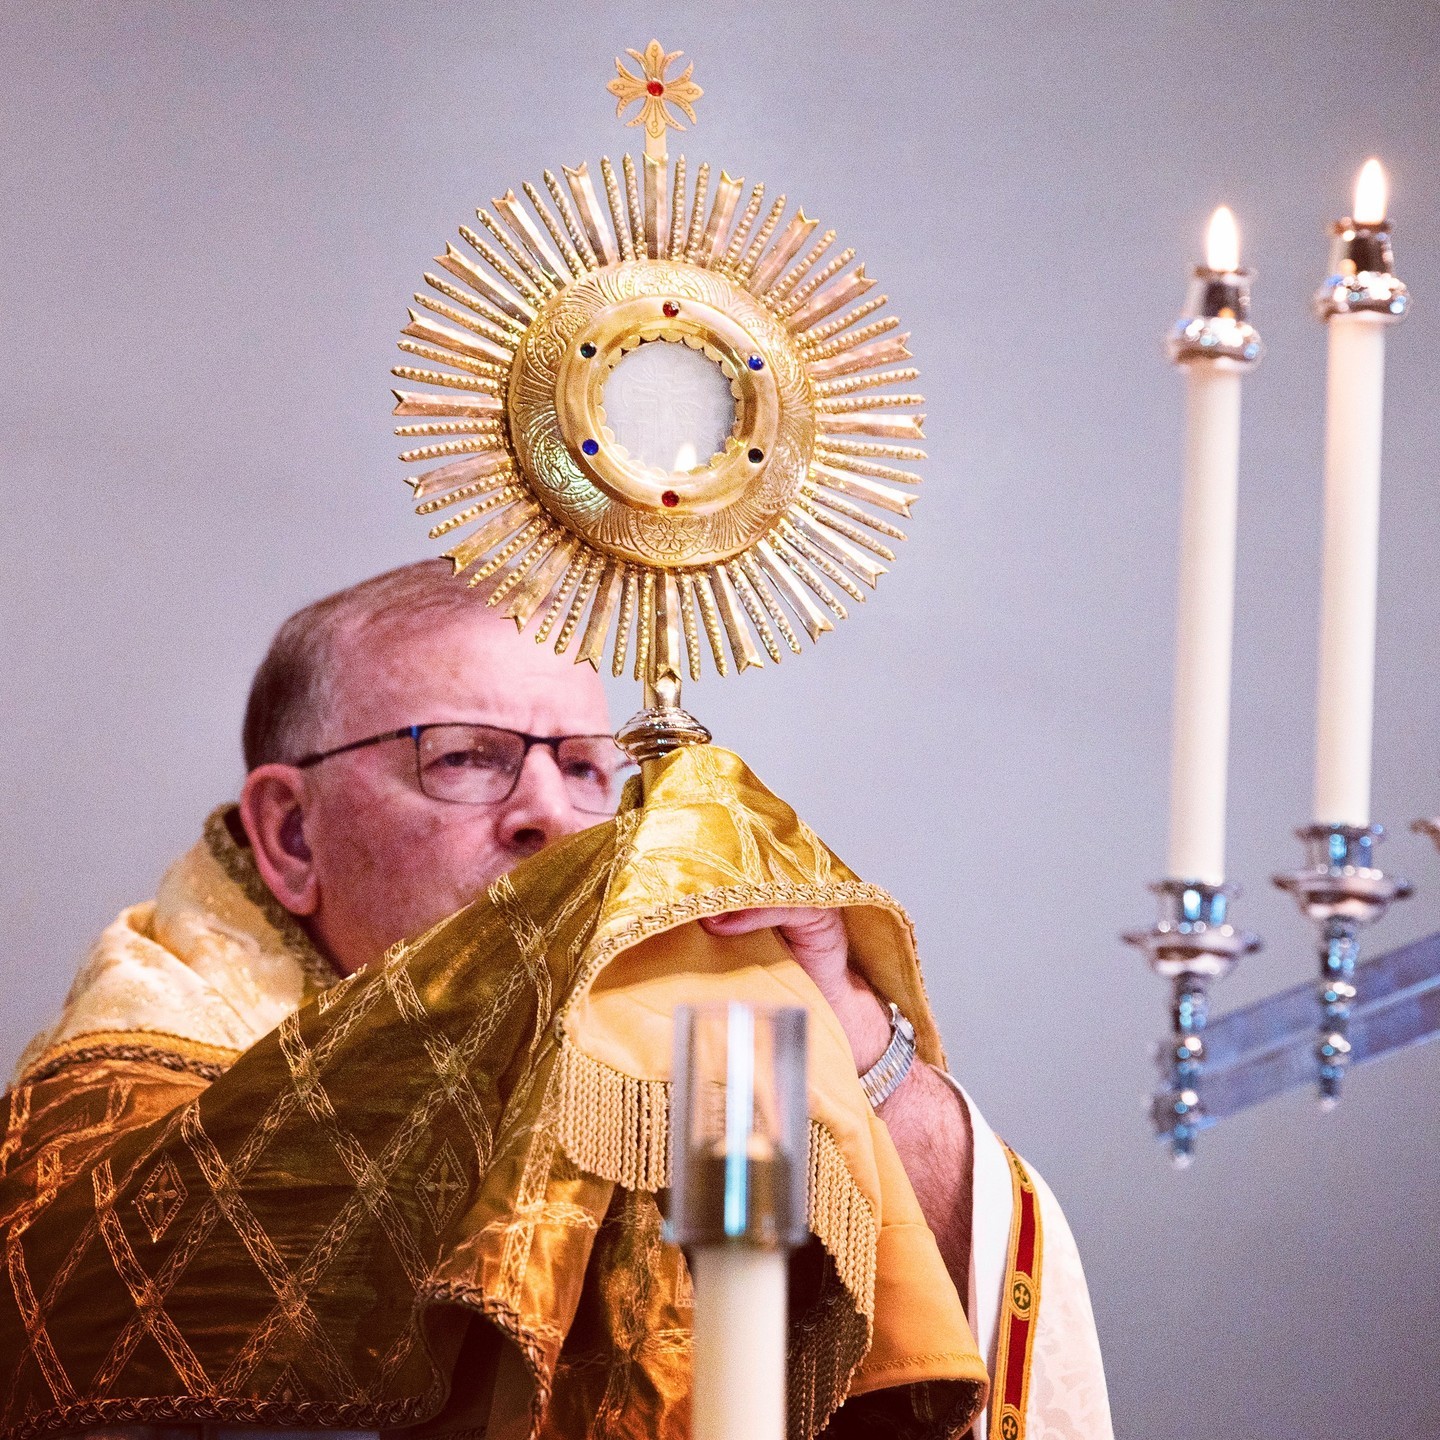 Dozens of Catholics from across the diocese made stops at three parishes in the eastern part of the diocese Aug. 4 for a eucharistic pilgrimage as part of the National Eucharistic Revival. See more photos at the link in our bio.⁠
#NationalEucharisticRevival #EucharisticRevival #Eucharist #CatholicProudStCloud #CatholicsofInstagram